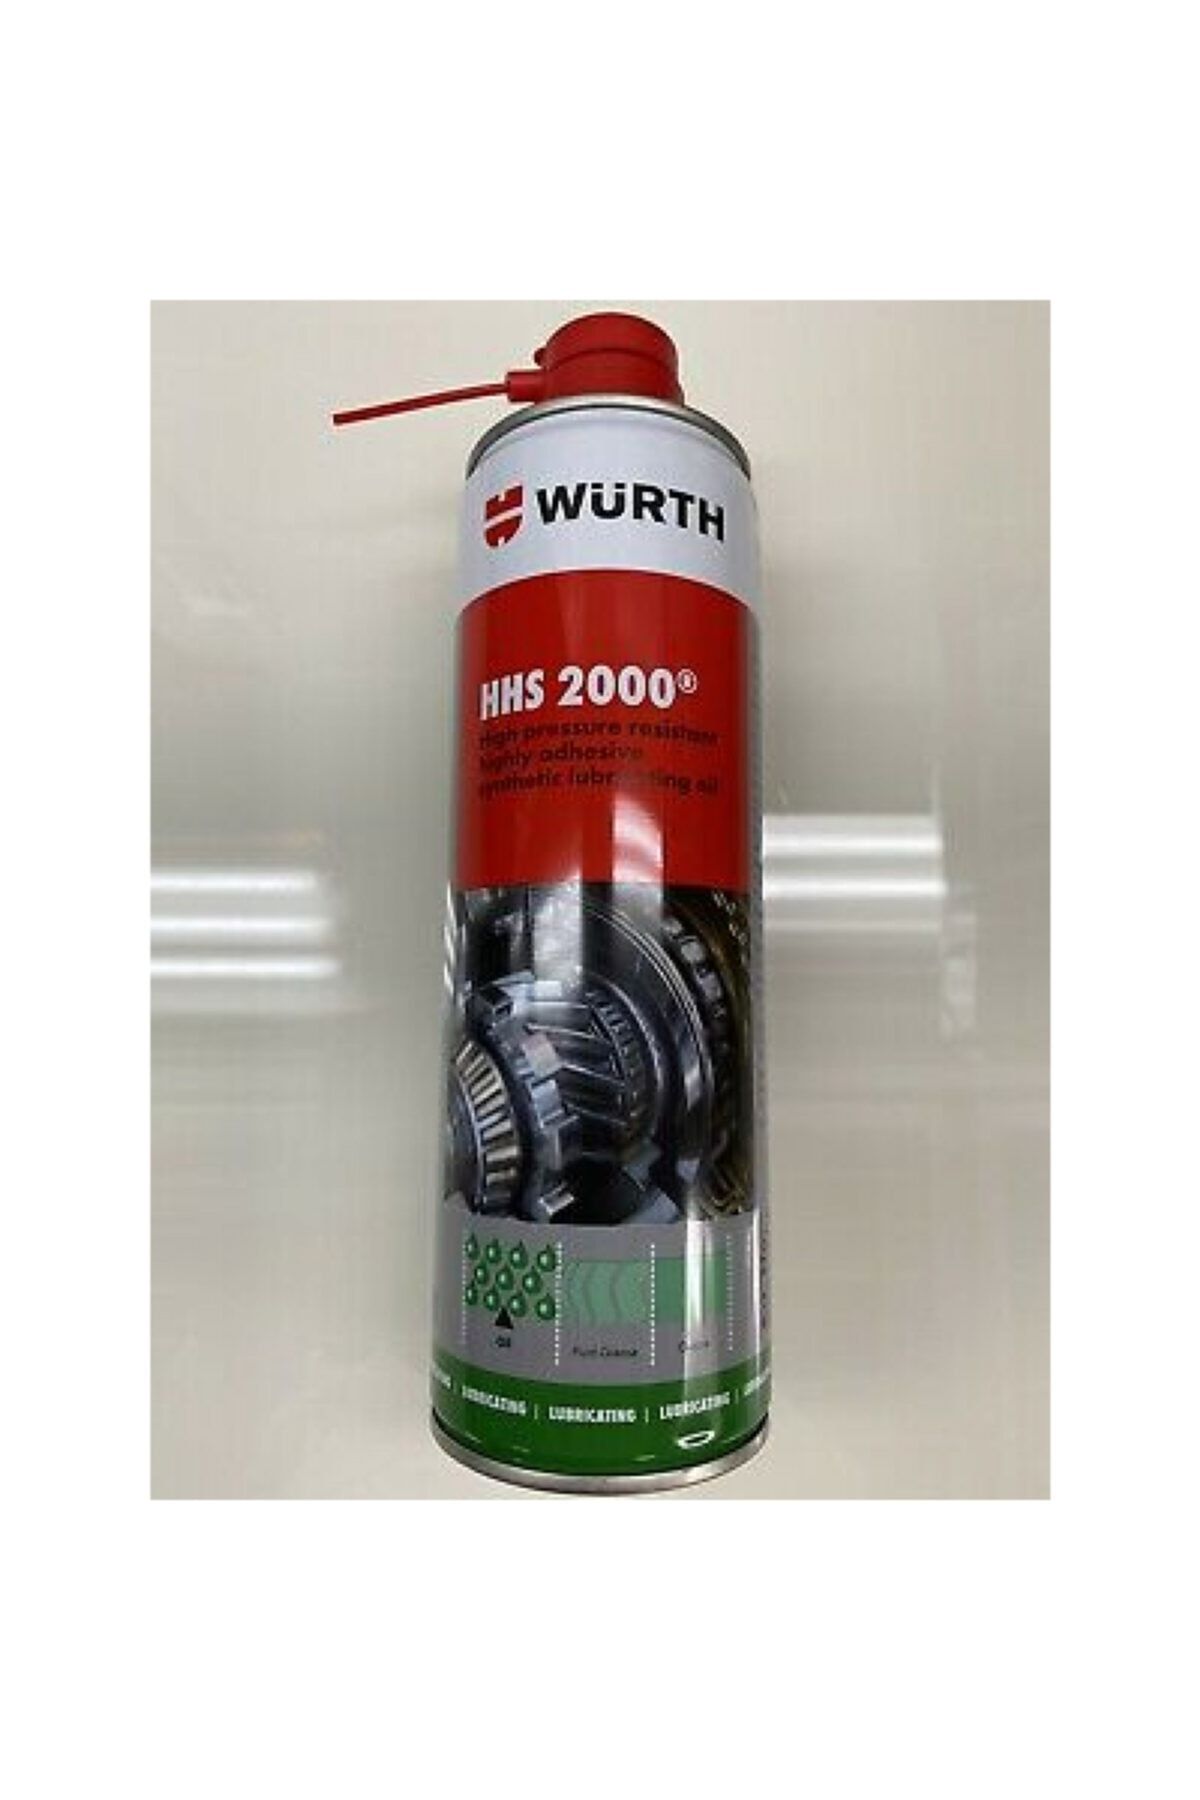 Wurth HHS 2000 аналоги смазки. Wurth hhs 2000